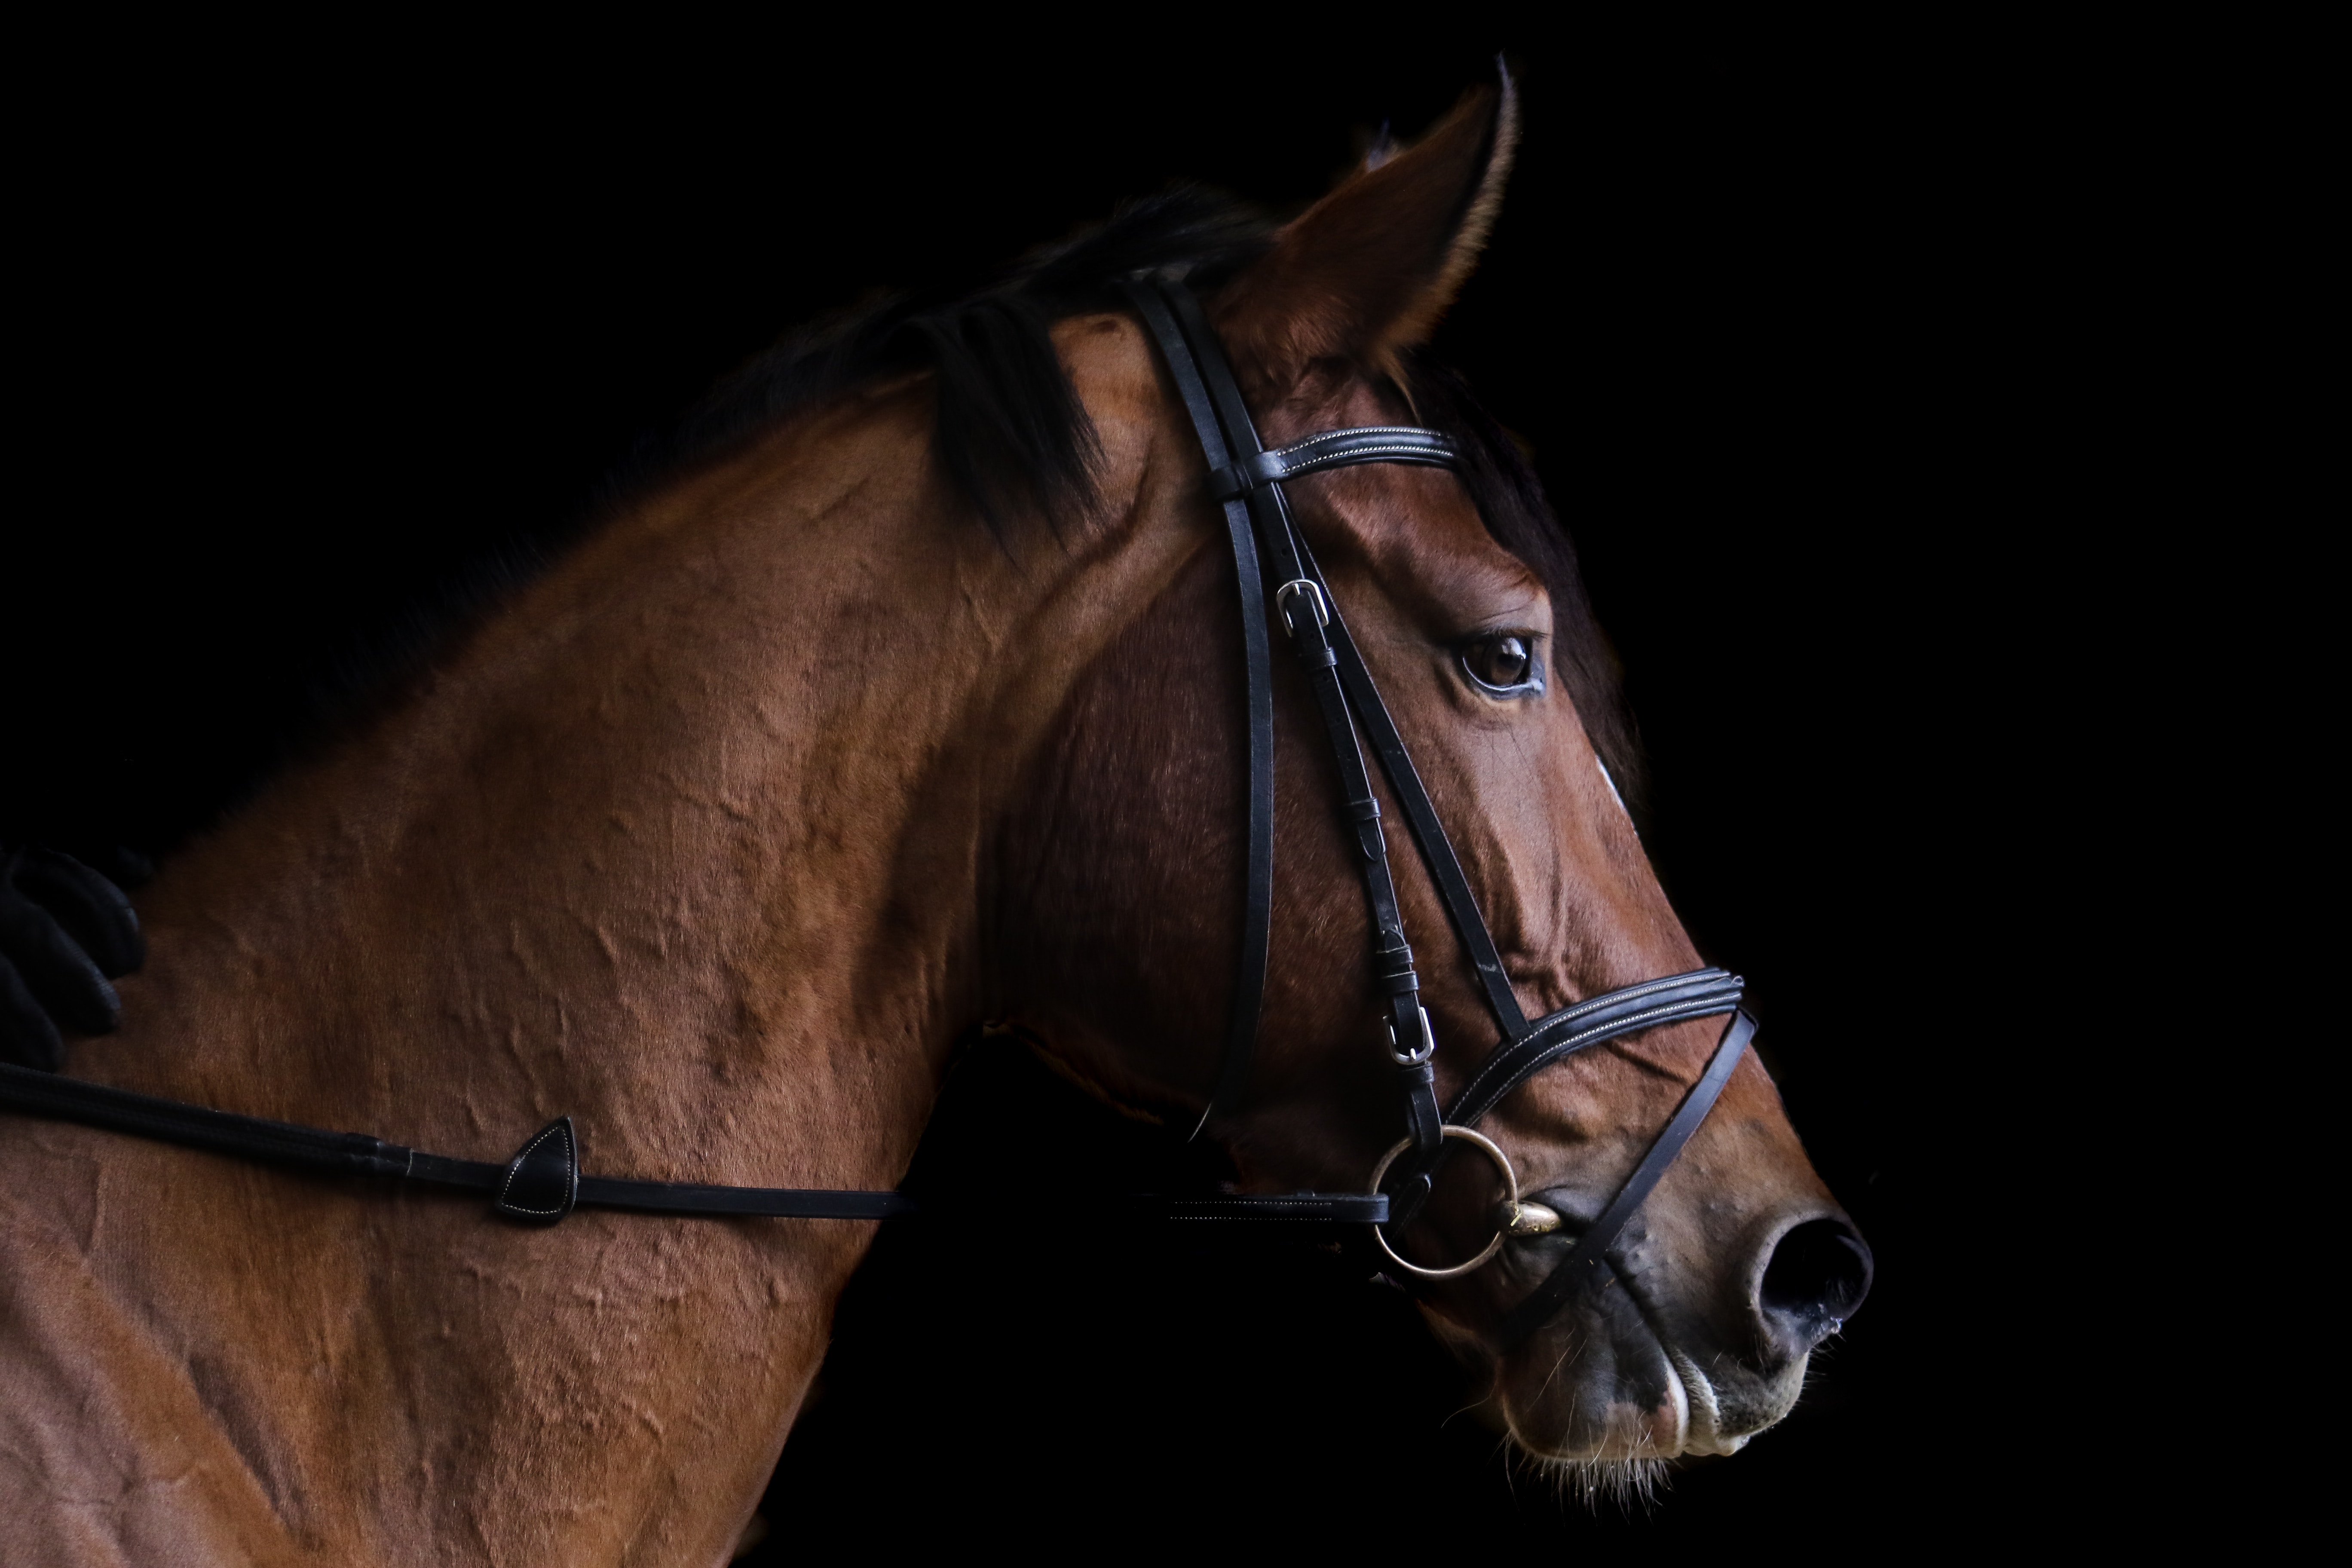 Urge the International Olympic Committee to Ban All Equestrian Events